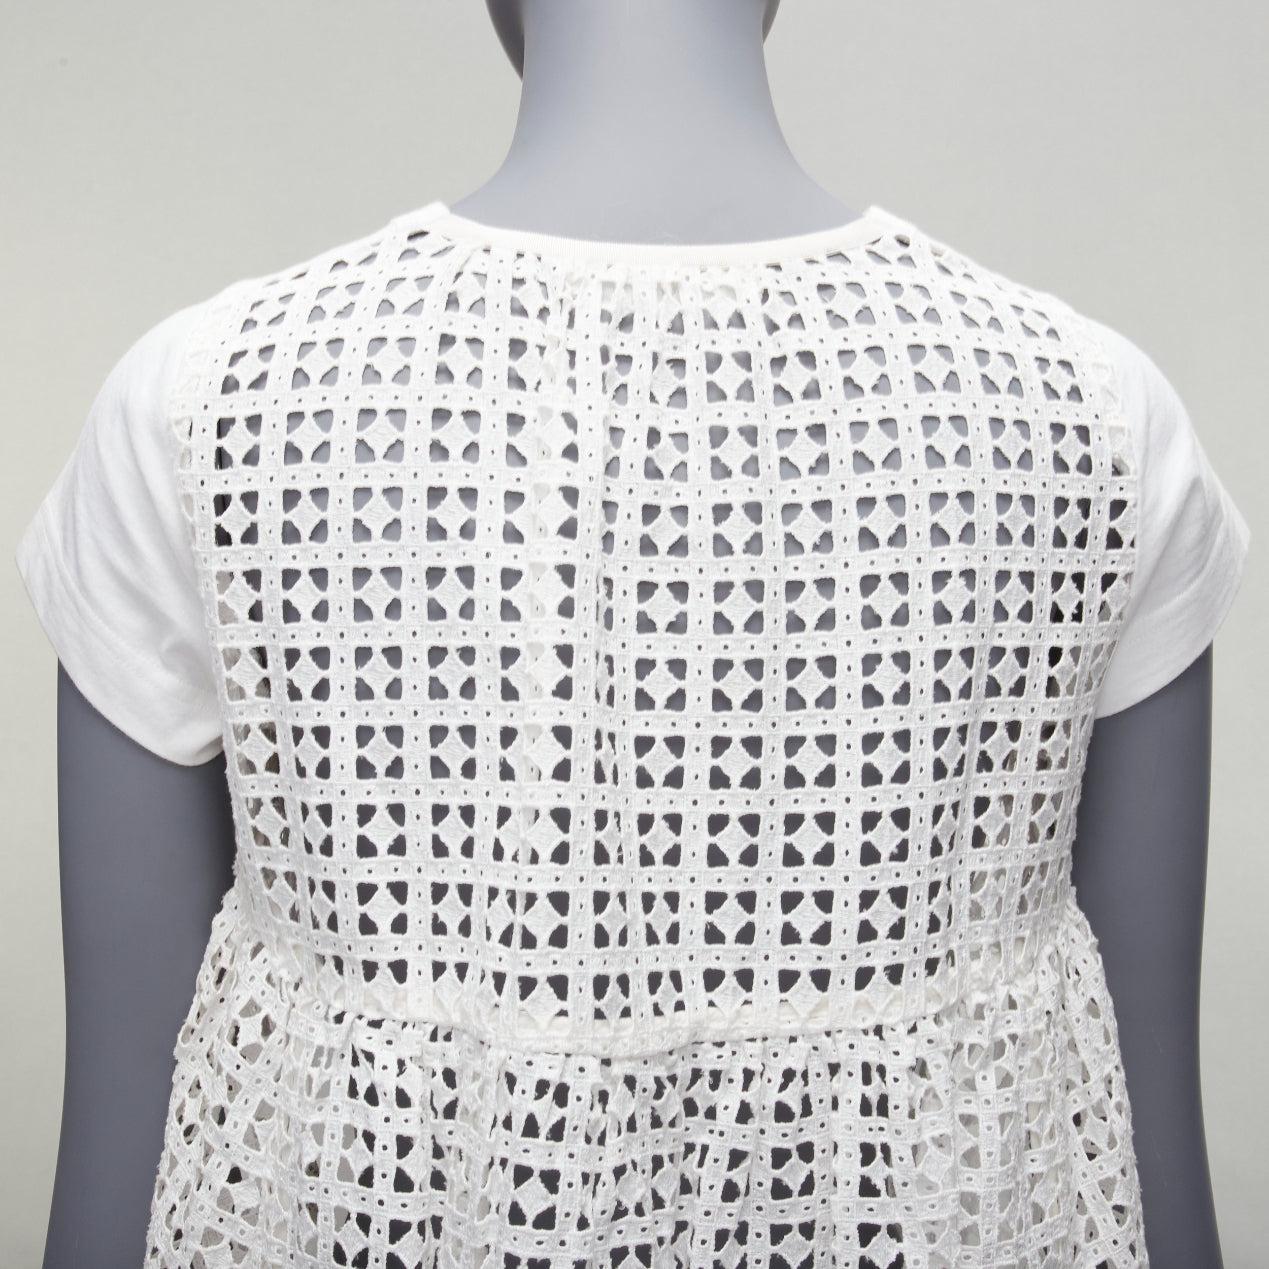 SACAI LUCK white eyelet flared back babydoll short sleeve pockted tshirt top JP1 S
Reference: LNKO/A02174
Brand: Sacai
Designer: Chitose Abe
Collection: Sacai Luck
Material: Cotton
Color: White
Pattern: Solid
Closure: Pull On
Extra Details: Lace